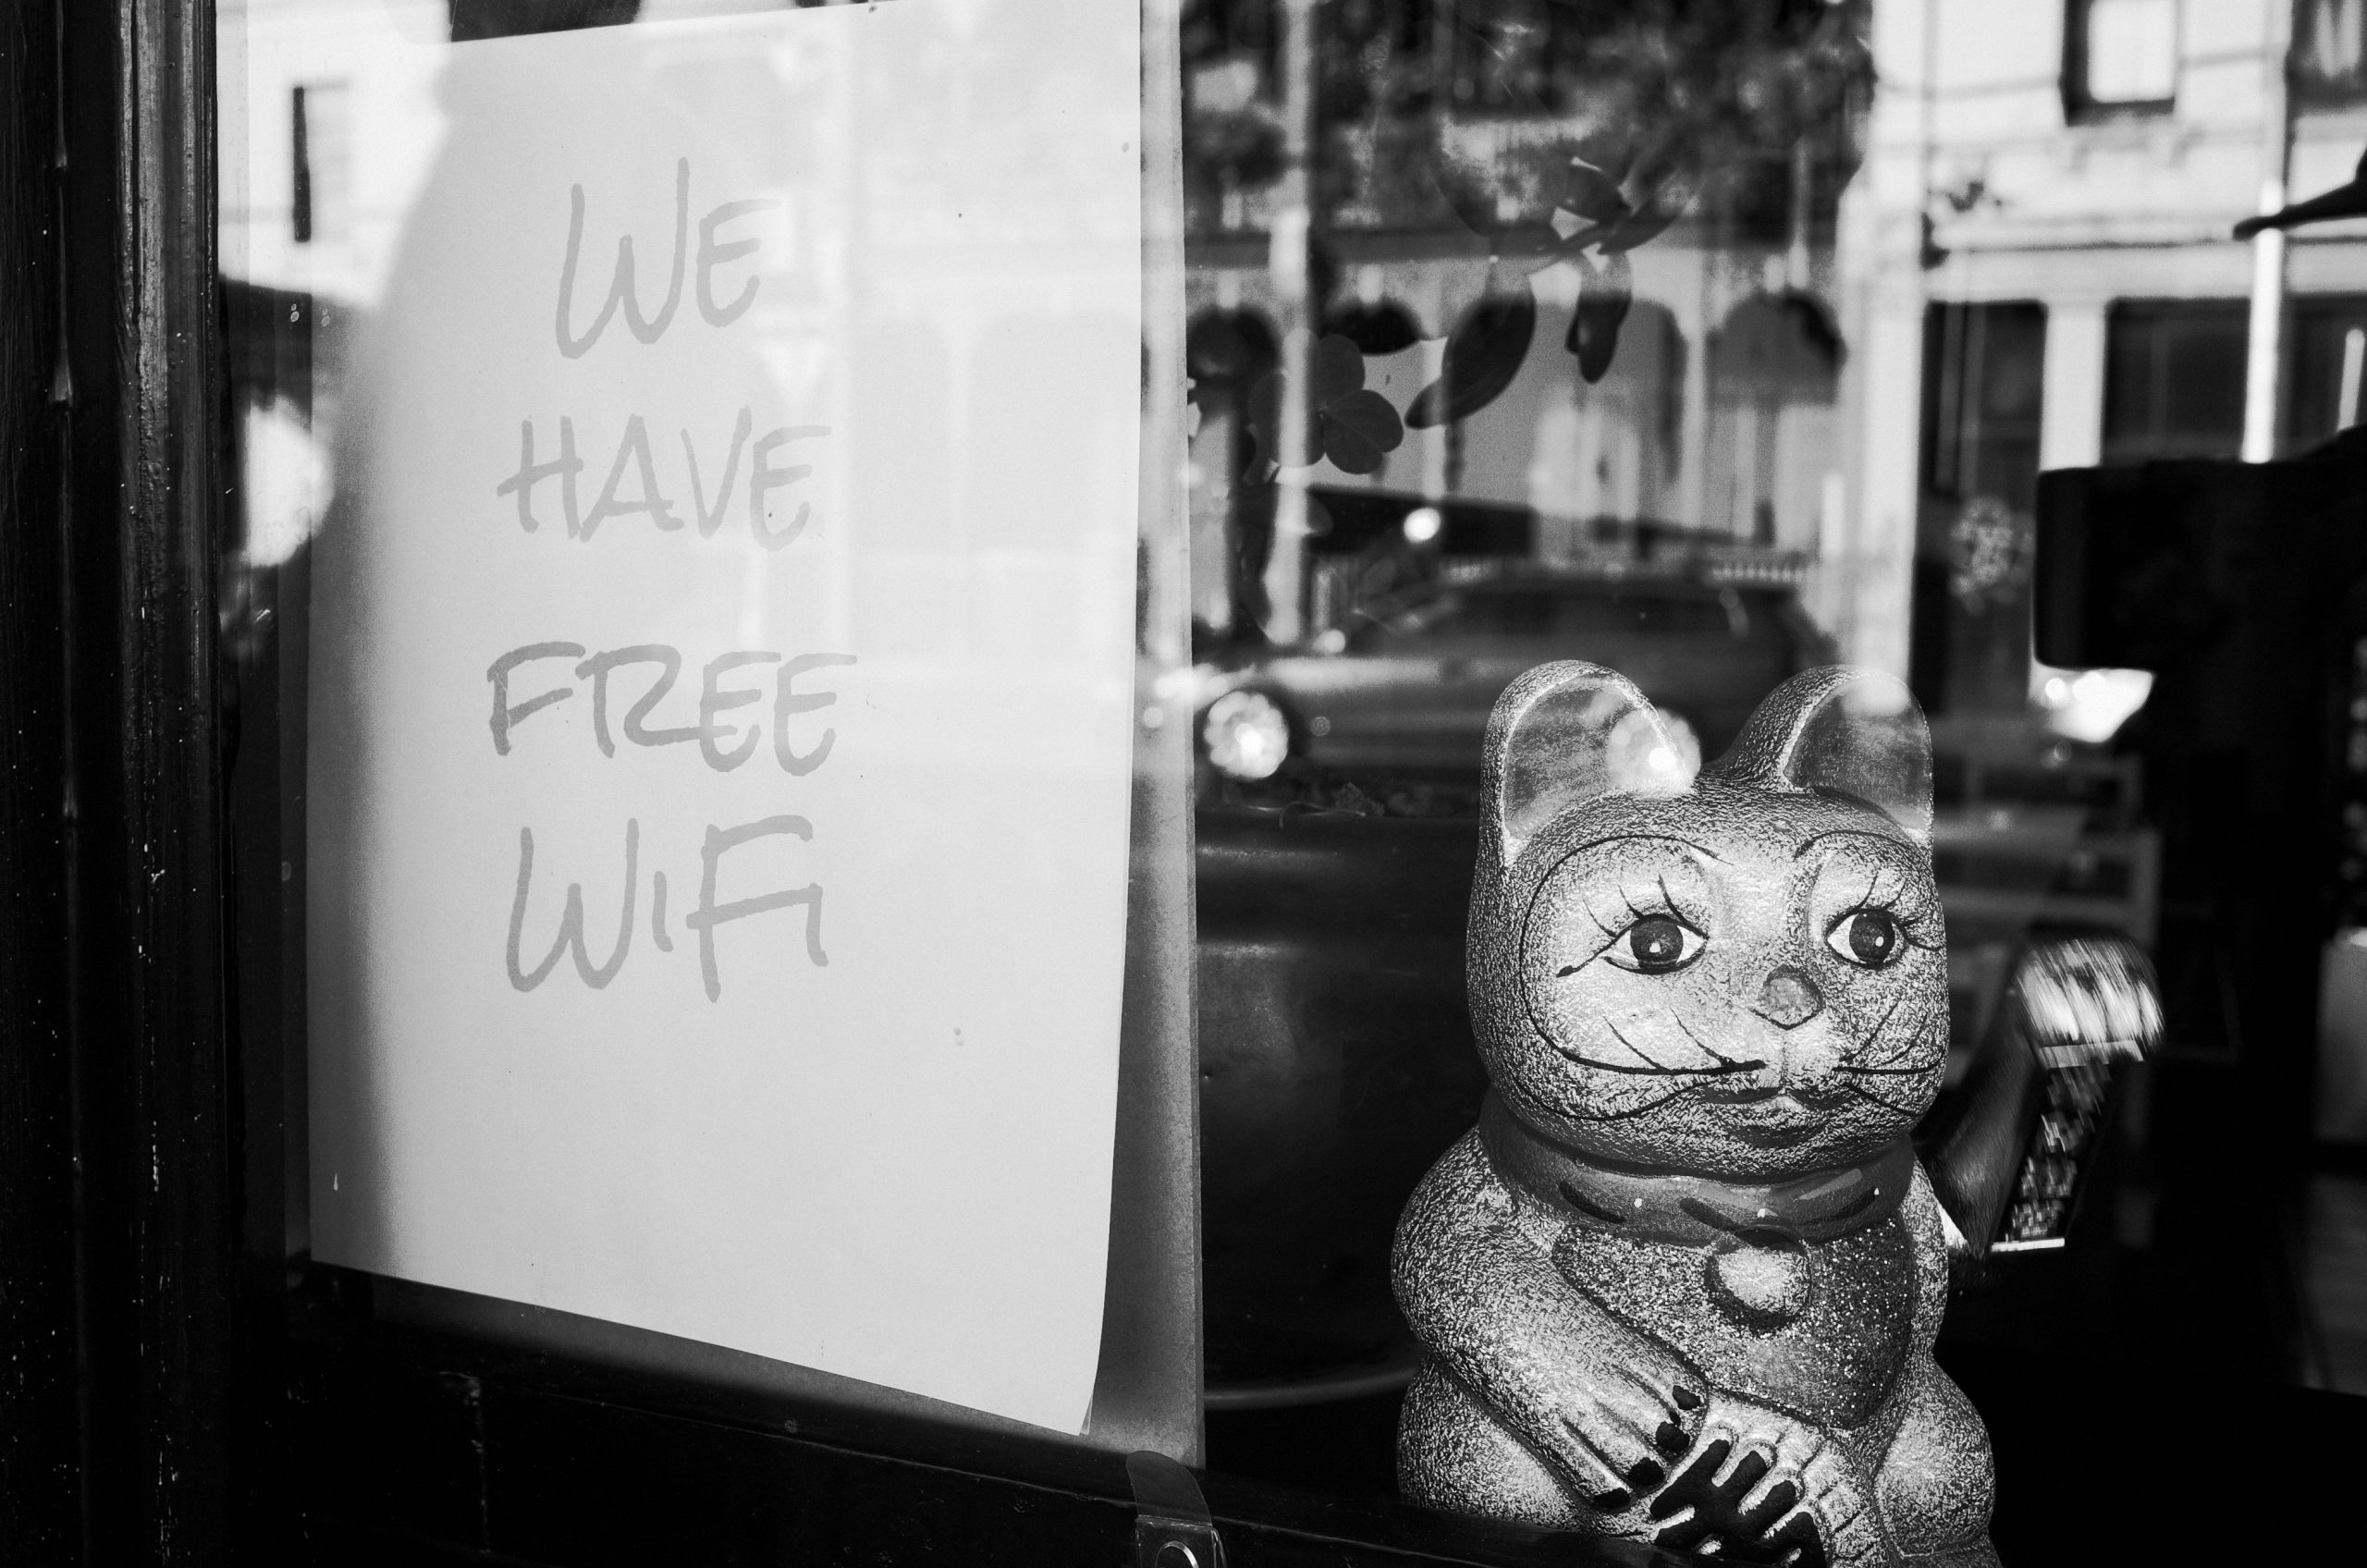 Shop window sign with "we have free WiFi" written on it